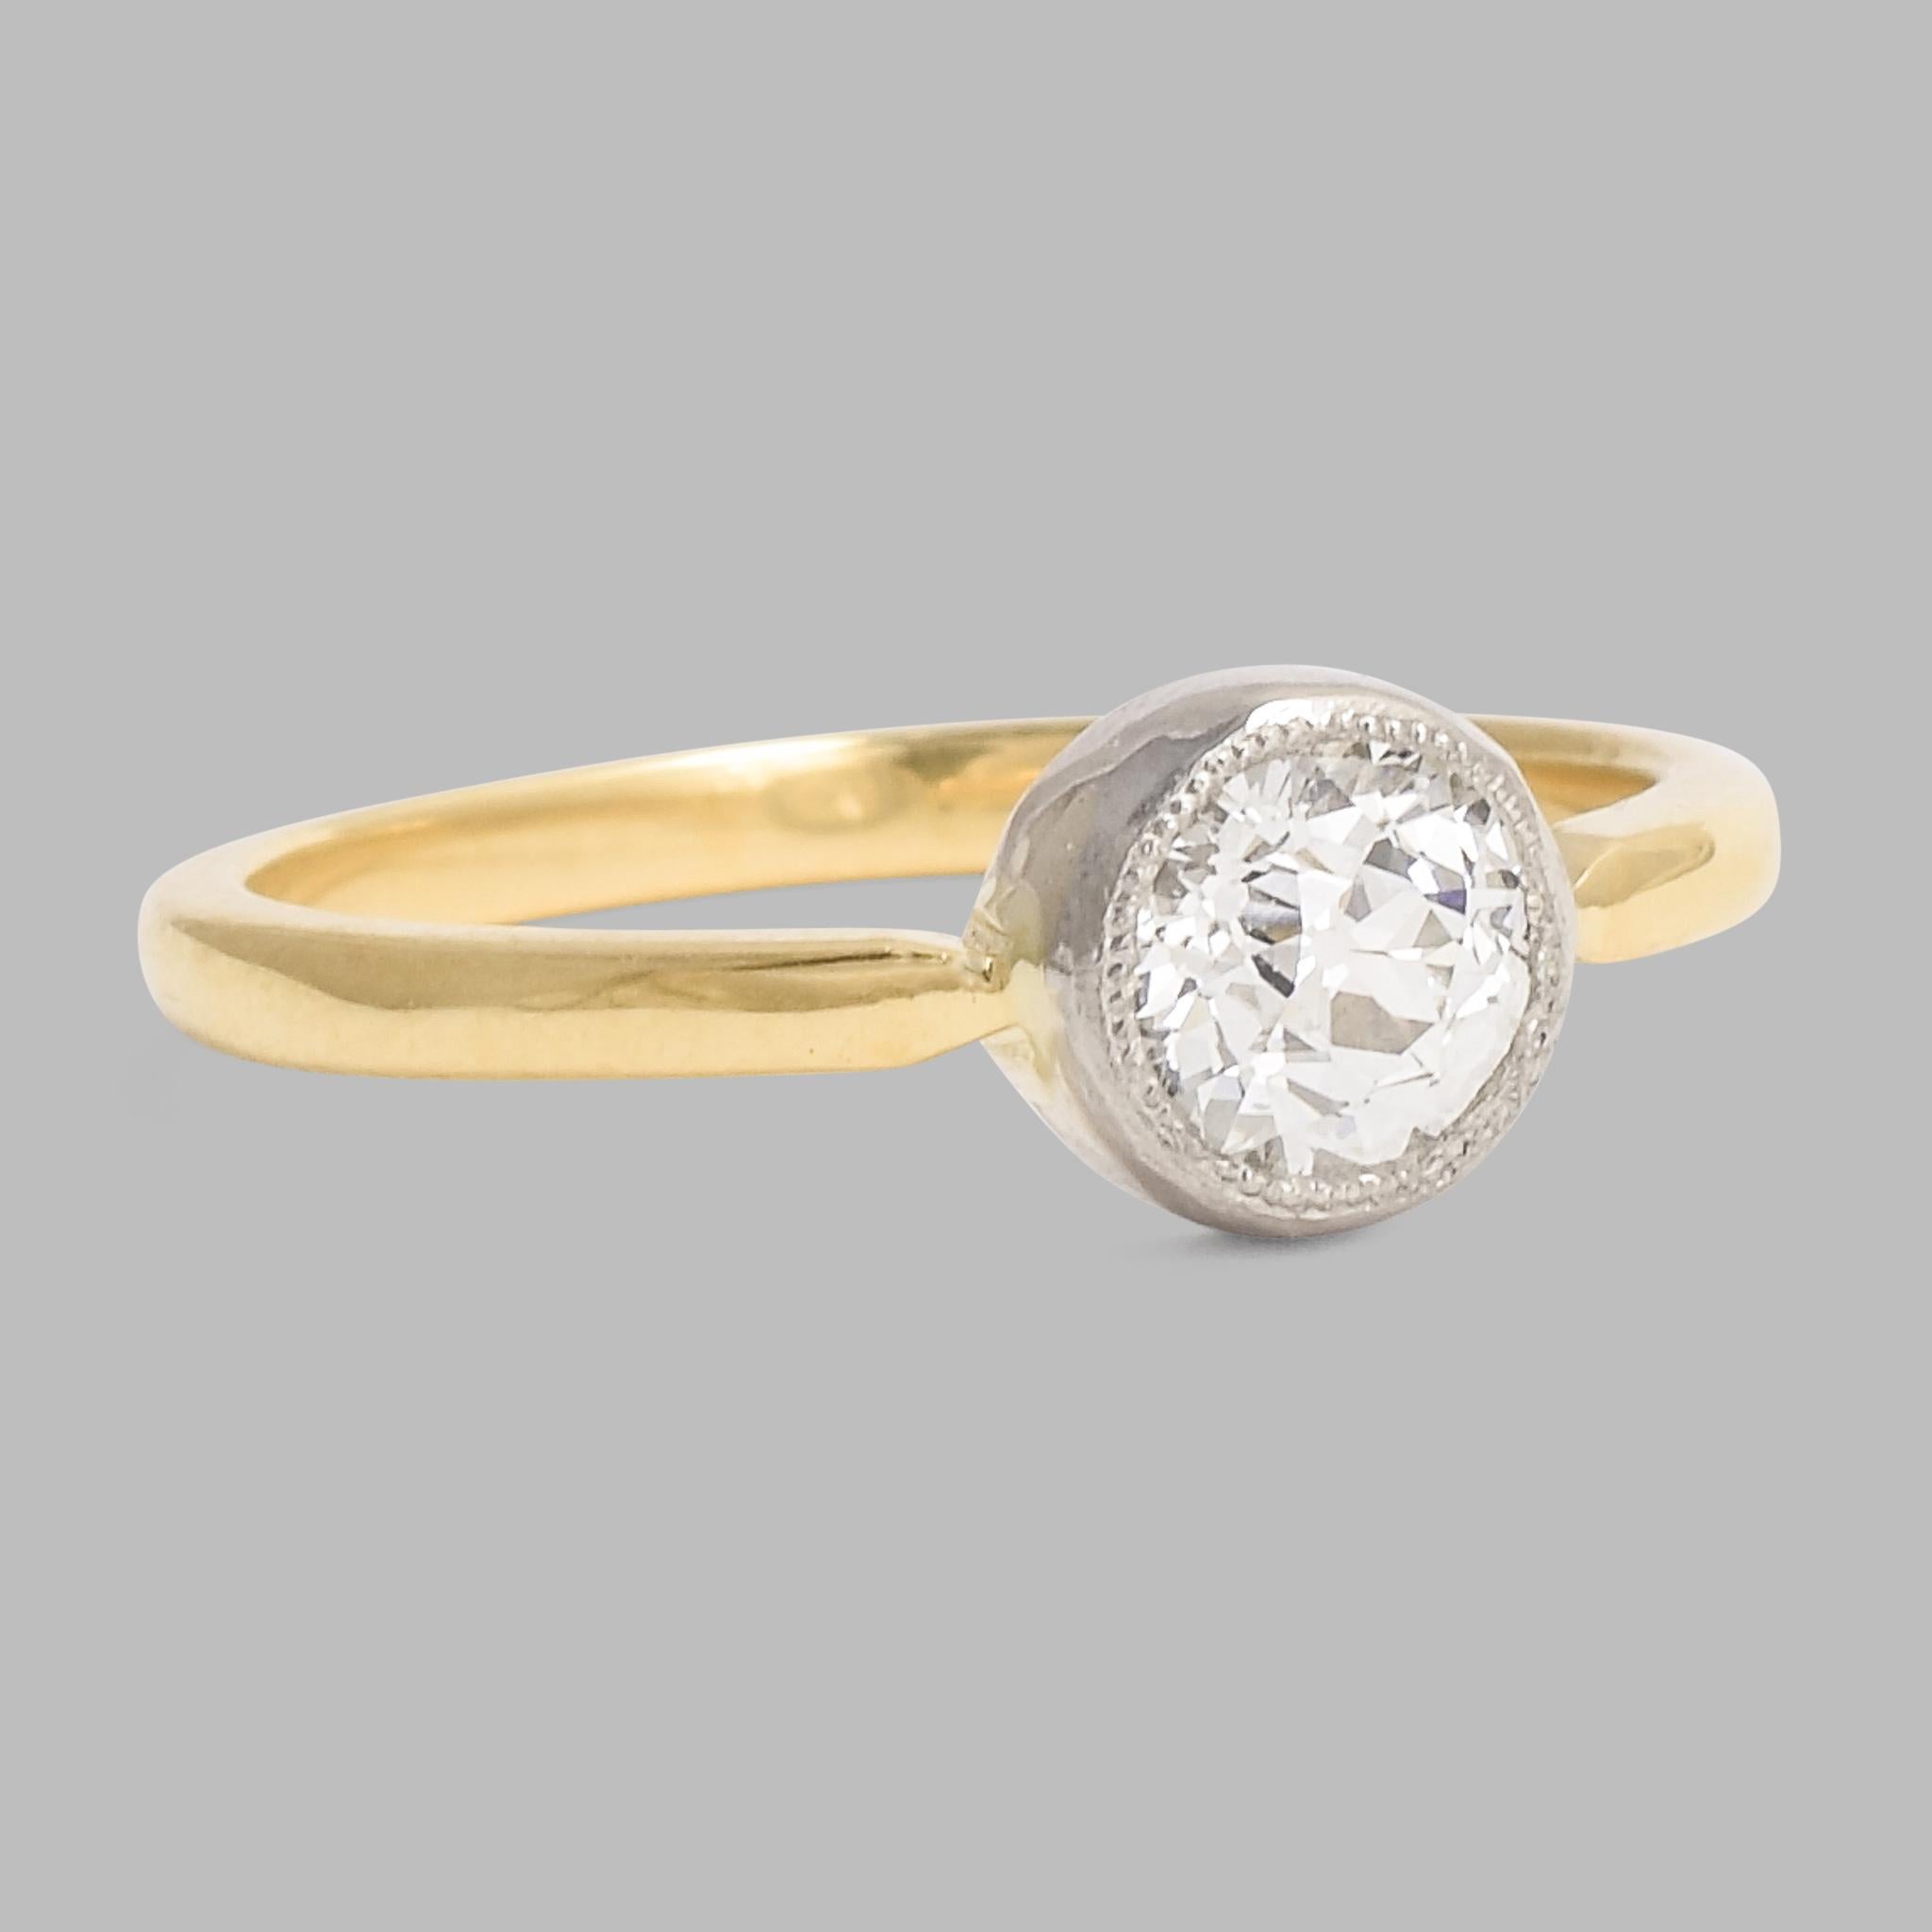 BL Bespoke Collection

A unique diamond solitaire ring set with a stunning old European cut diamond. The stone is GIA certified with VS1 clarity, and rests in a handmade platinum mount finished in fine millegrain. The band is modelled in 18 karat